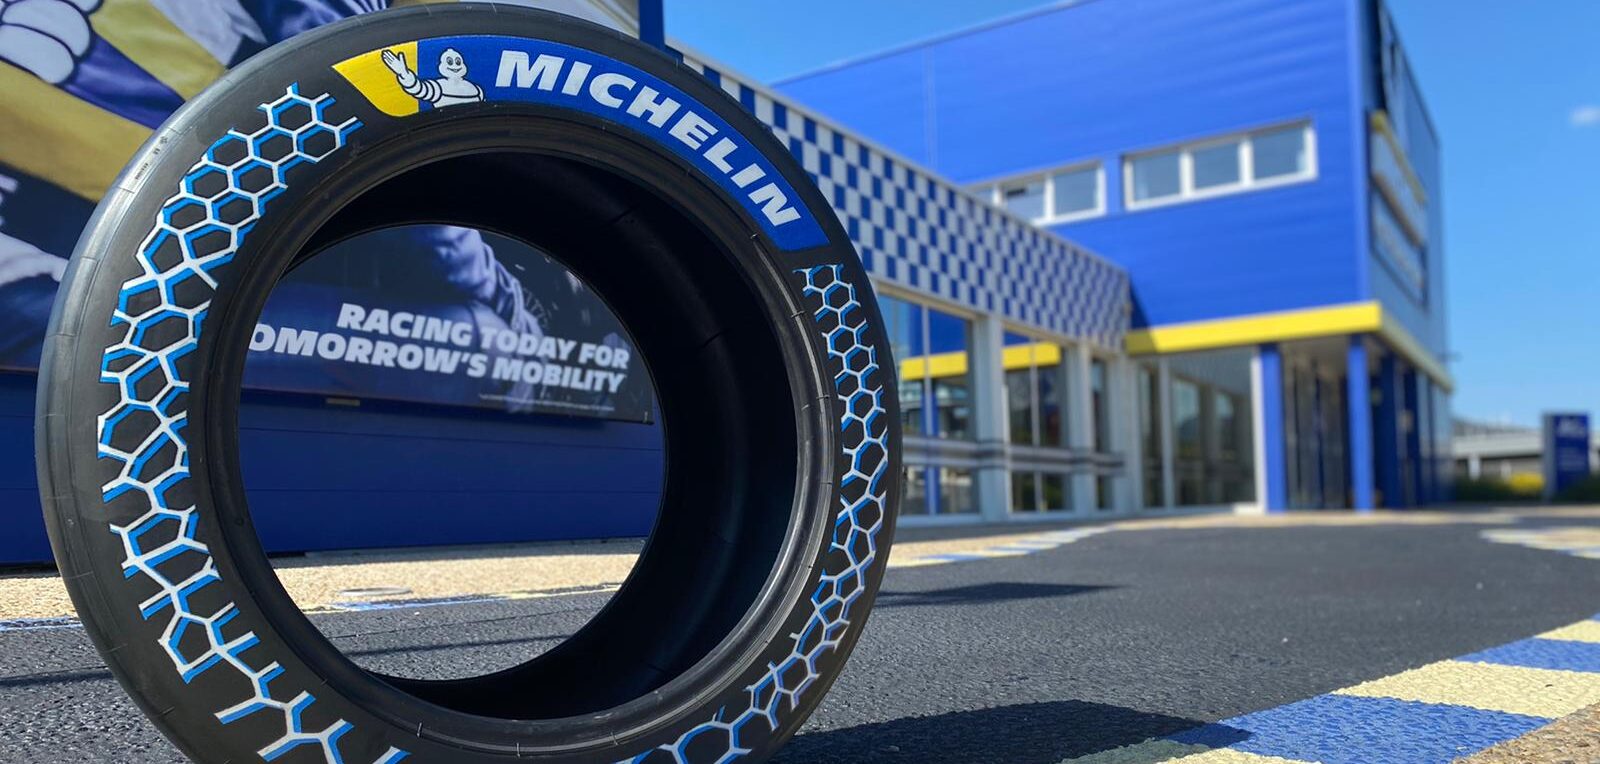 michelin releases details of track tire with 46% sustainable content | tire technology international